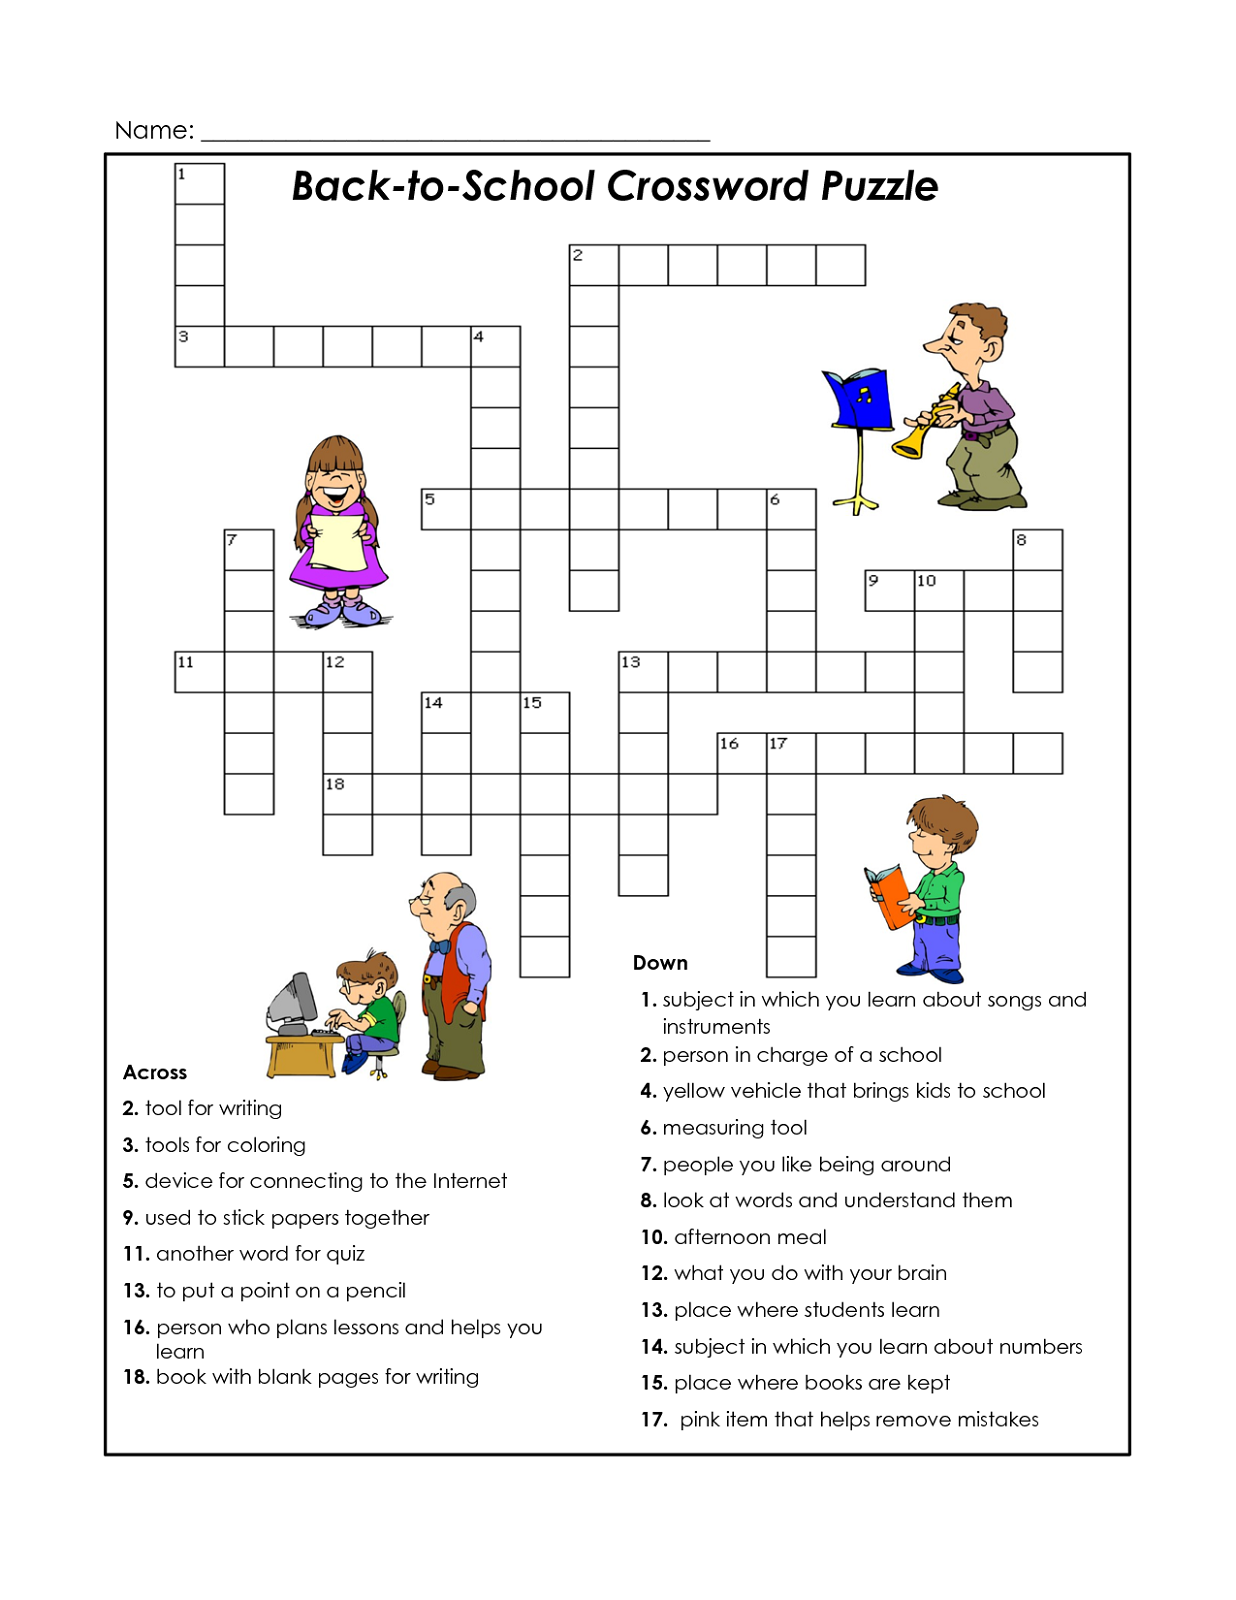 printable-crossword-puzzles-for-teenagers